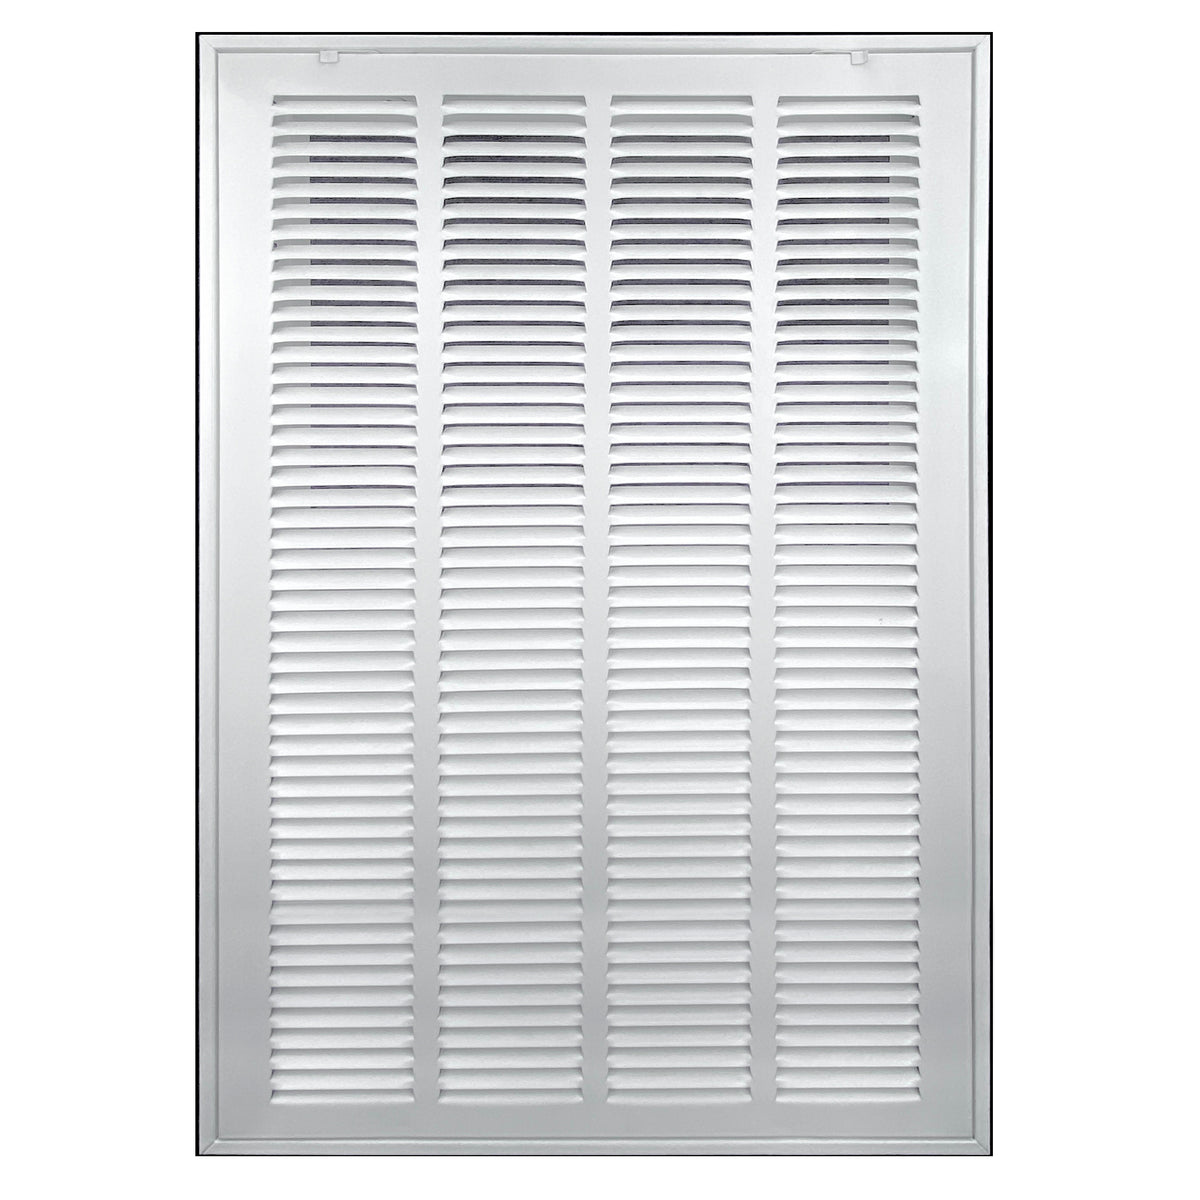 airgrilles 20" x 25" duct opening   steel return air filter grille  fixed hinged  for sidewall and ceiling hnd-fx-1rafg-wh-20x25 038775650564 - 1